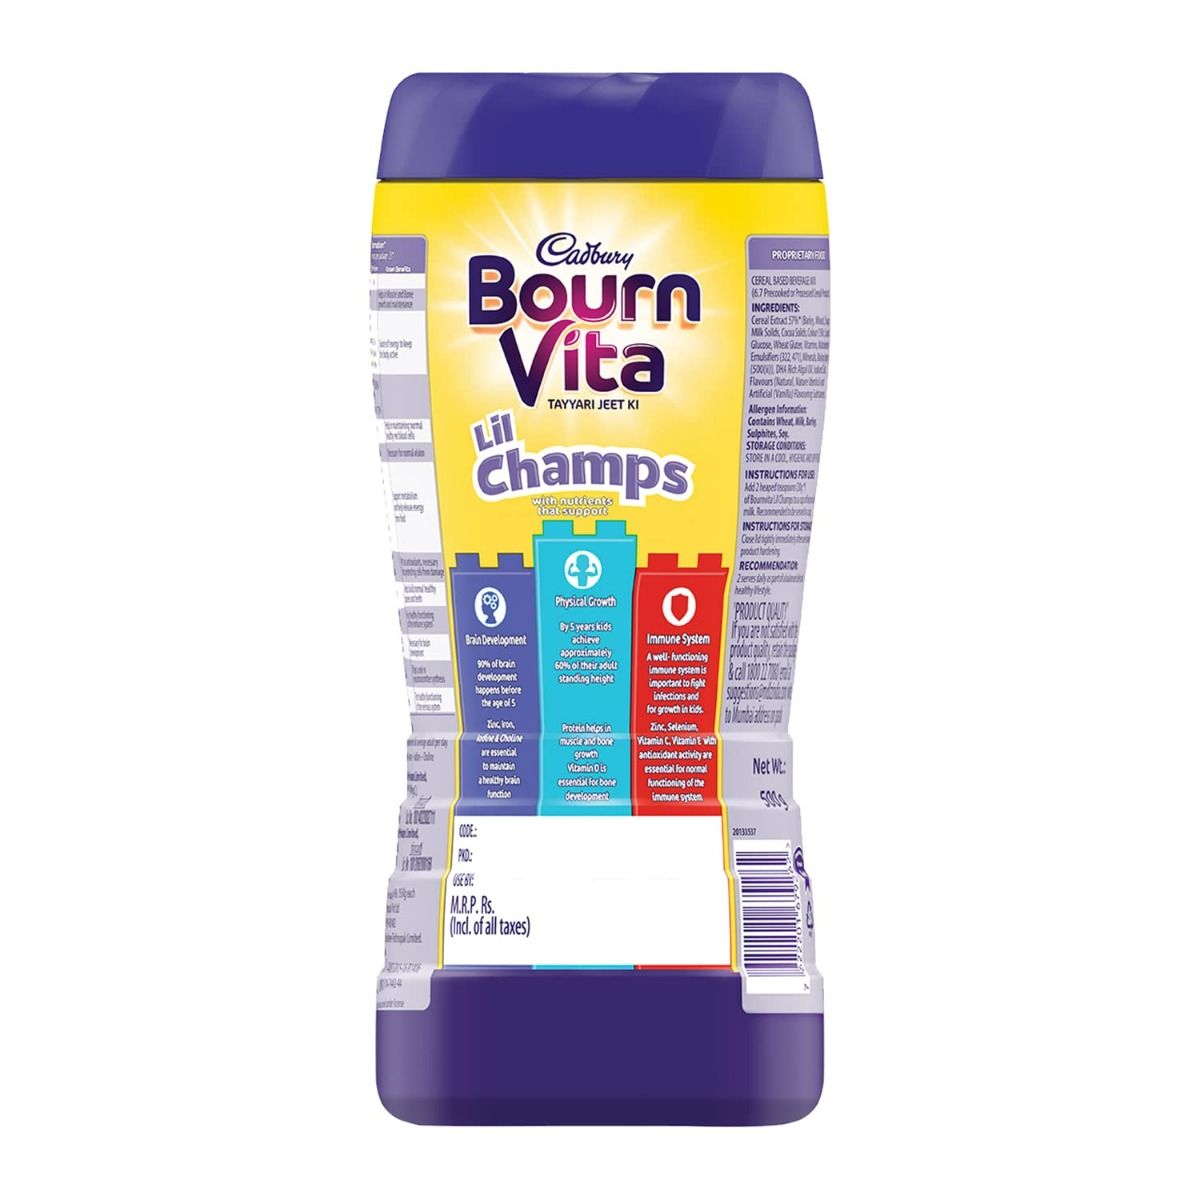 Cadbury Bournvita Lil Champs Nutrition Drink Powder for 3 to 5 Years Kids, 500 gm Jar, Pack of 1 